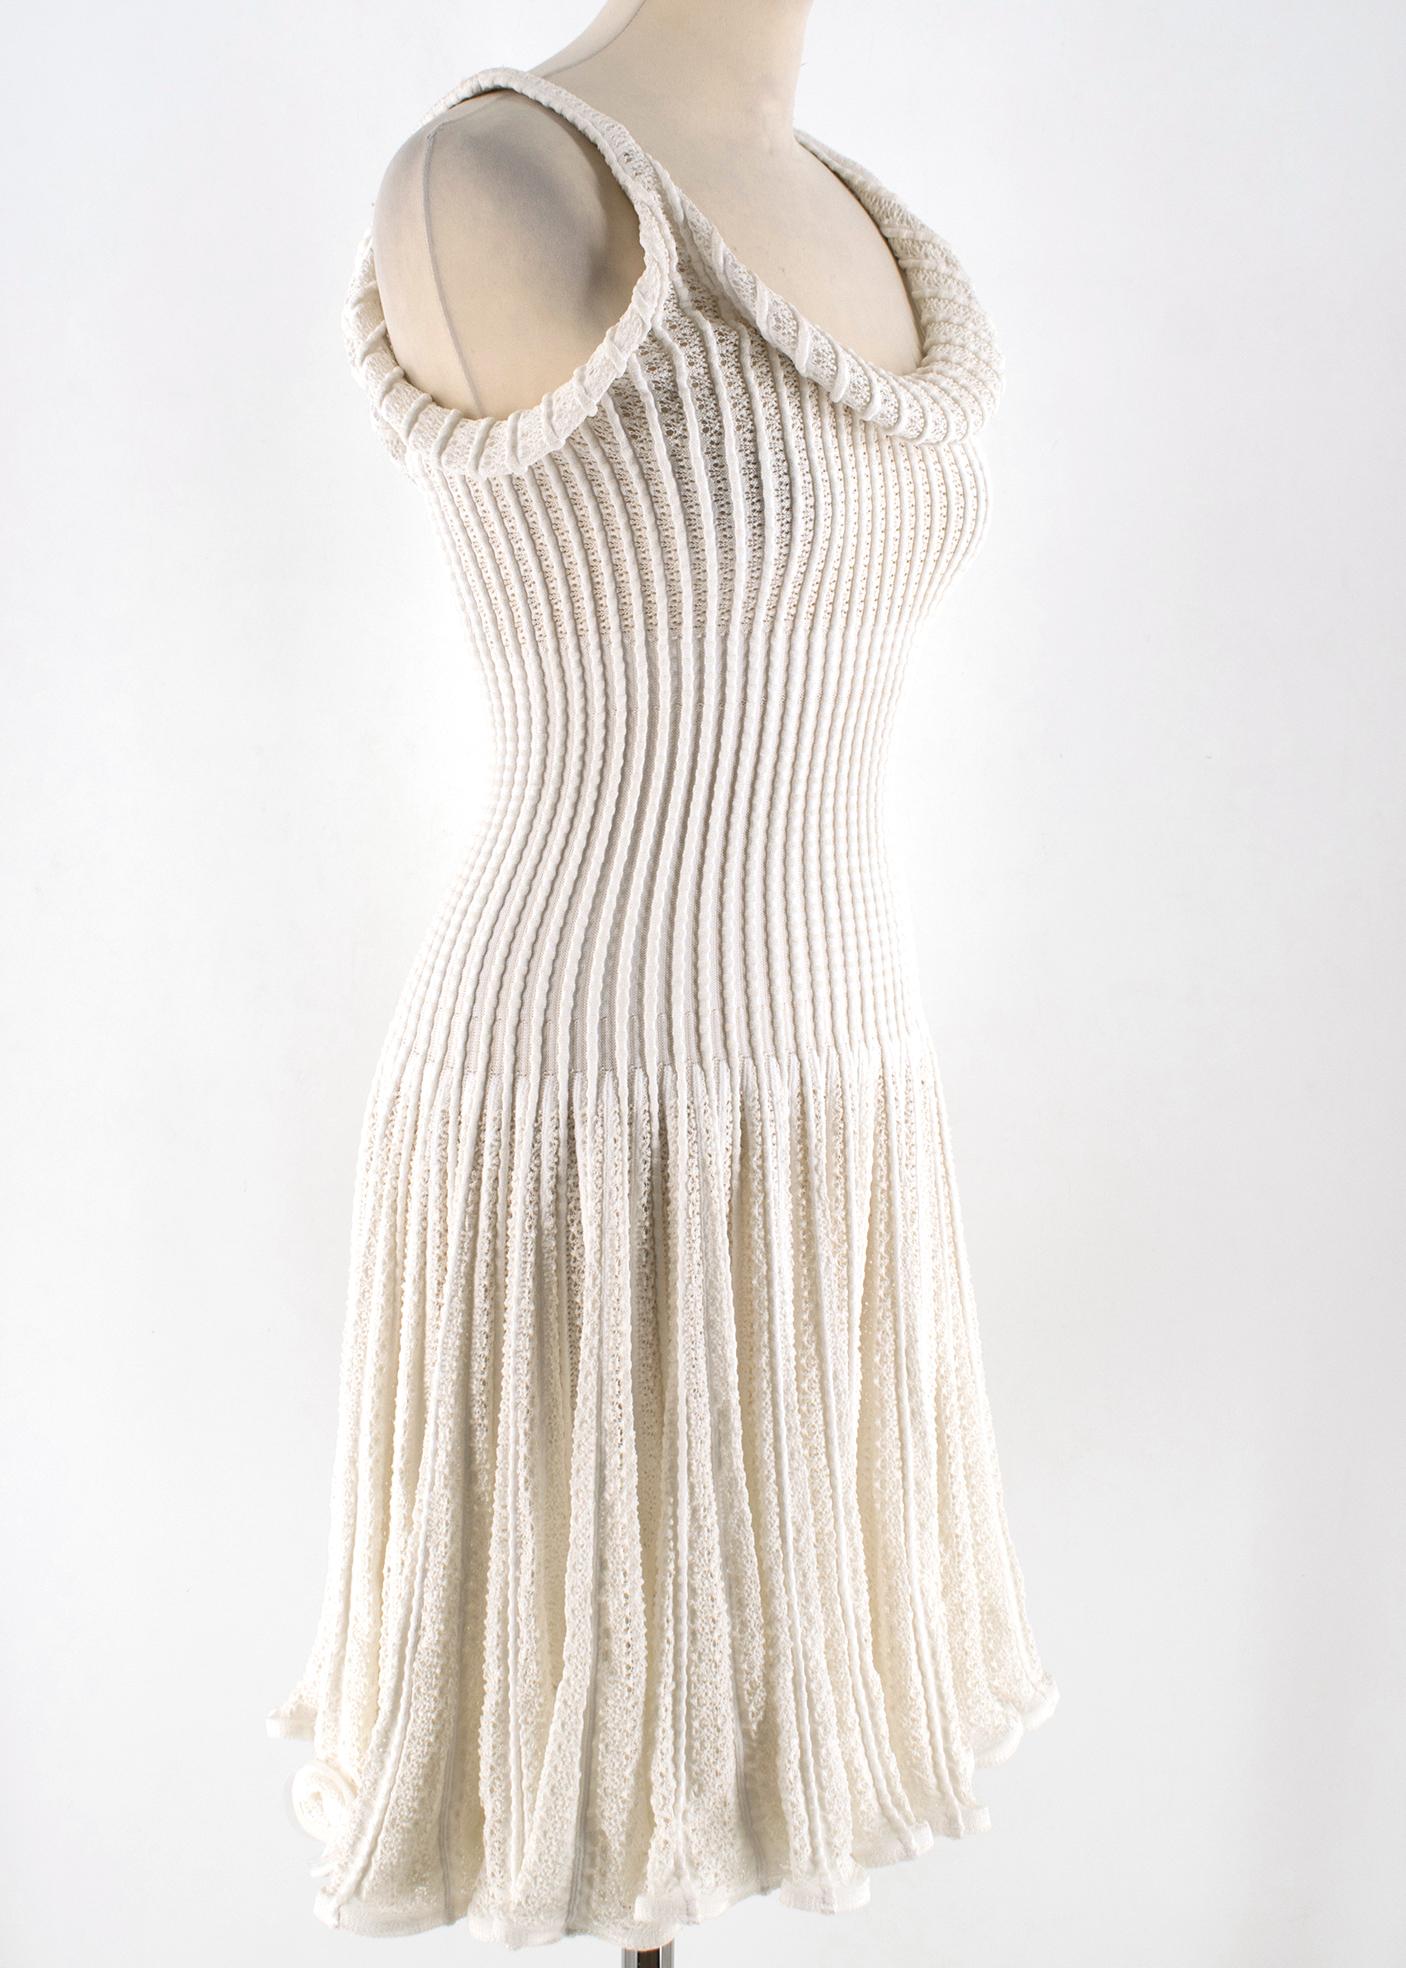 Stunning white ribbed knit dress in broderie anglaise. Bodycon upper fit with a flared skirt. RRP £2180.00

- Weighted knit
- Invisible rear zip closure
- Made in Italy
- 50% Cotton, 25% Viscose, 25% Polyamide


Please note, these items are